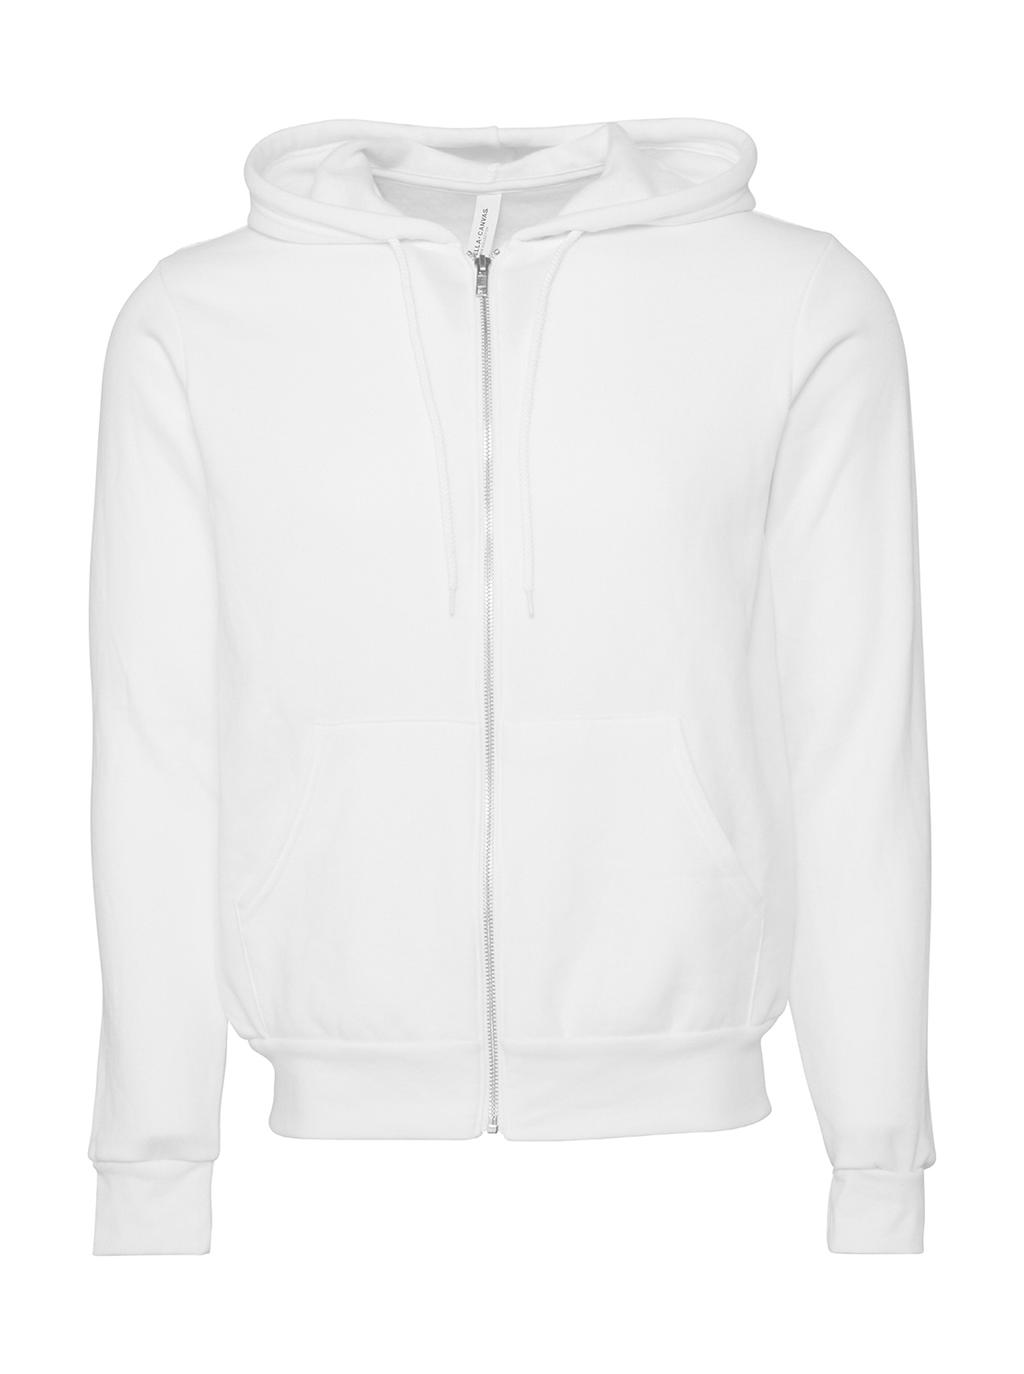  Unisex Poly-Cotton Full Zip Hoodie in Farbe DTG White